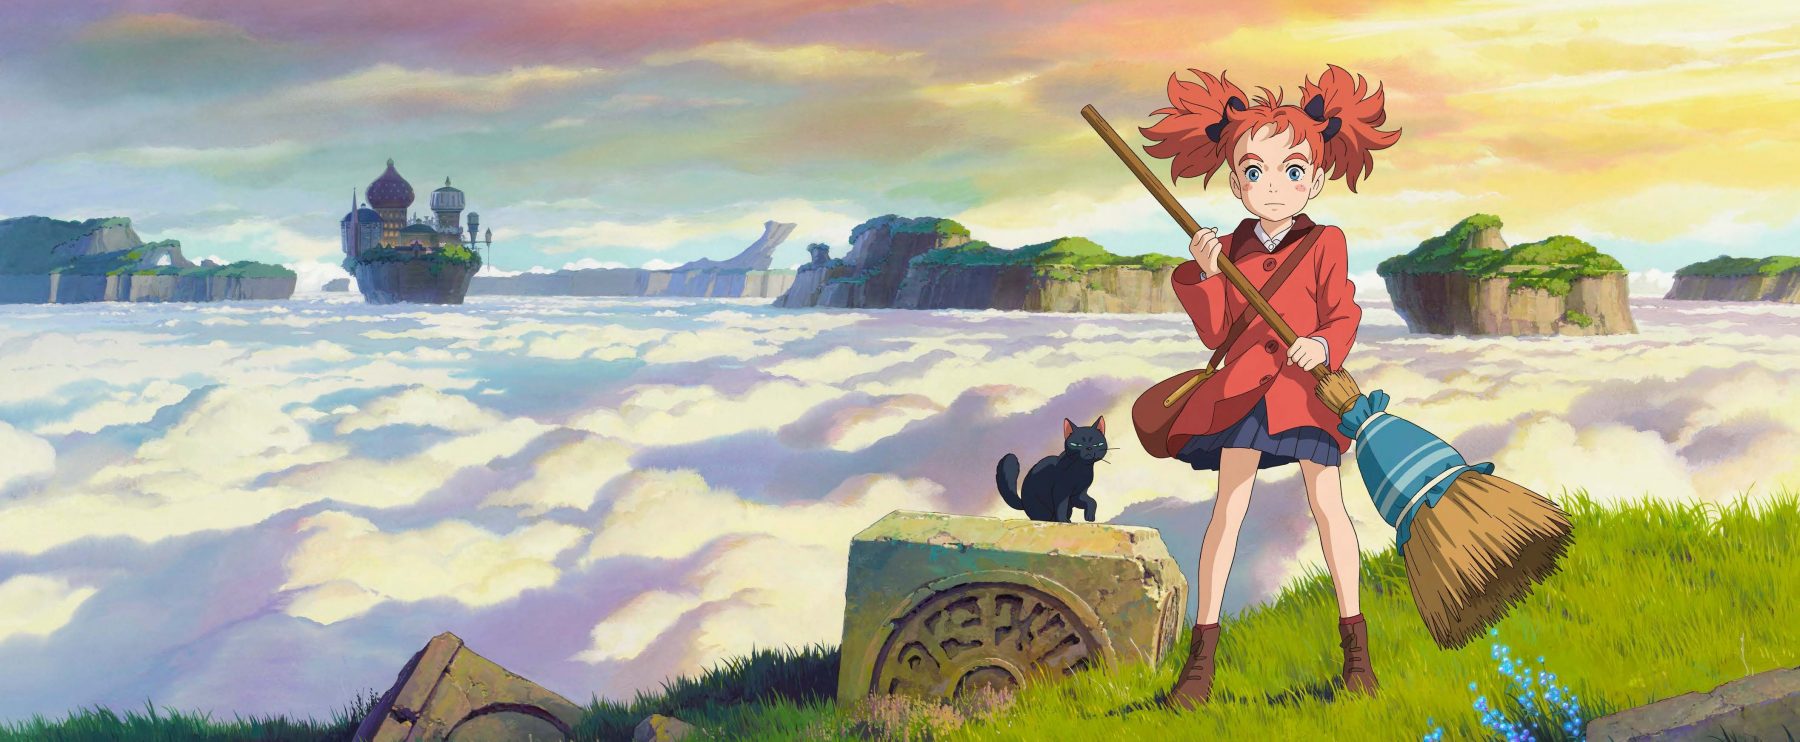 Studio ponoc brings the world back to ghibli’s early days with ‘mary and the witch’s flower’